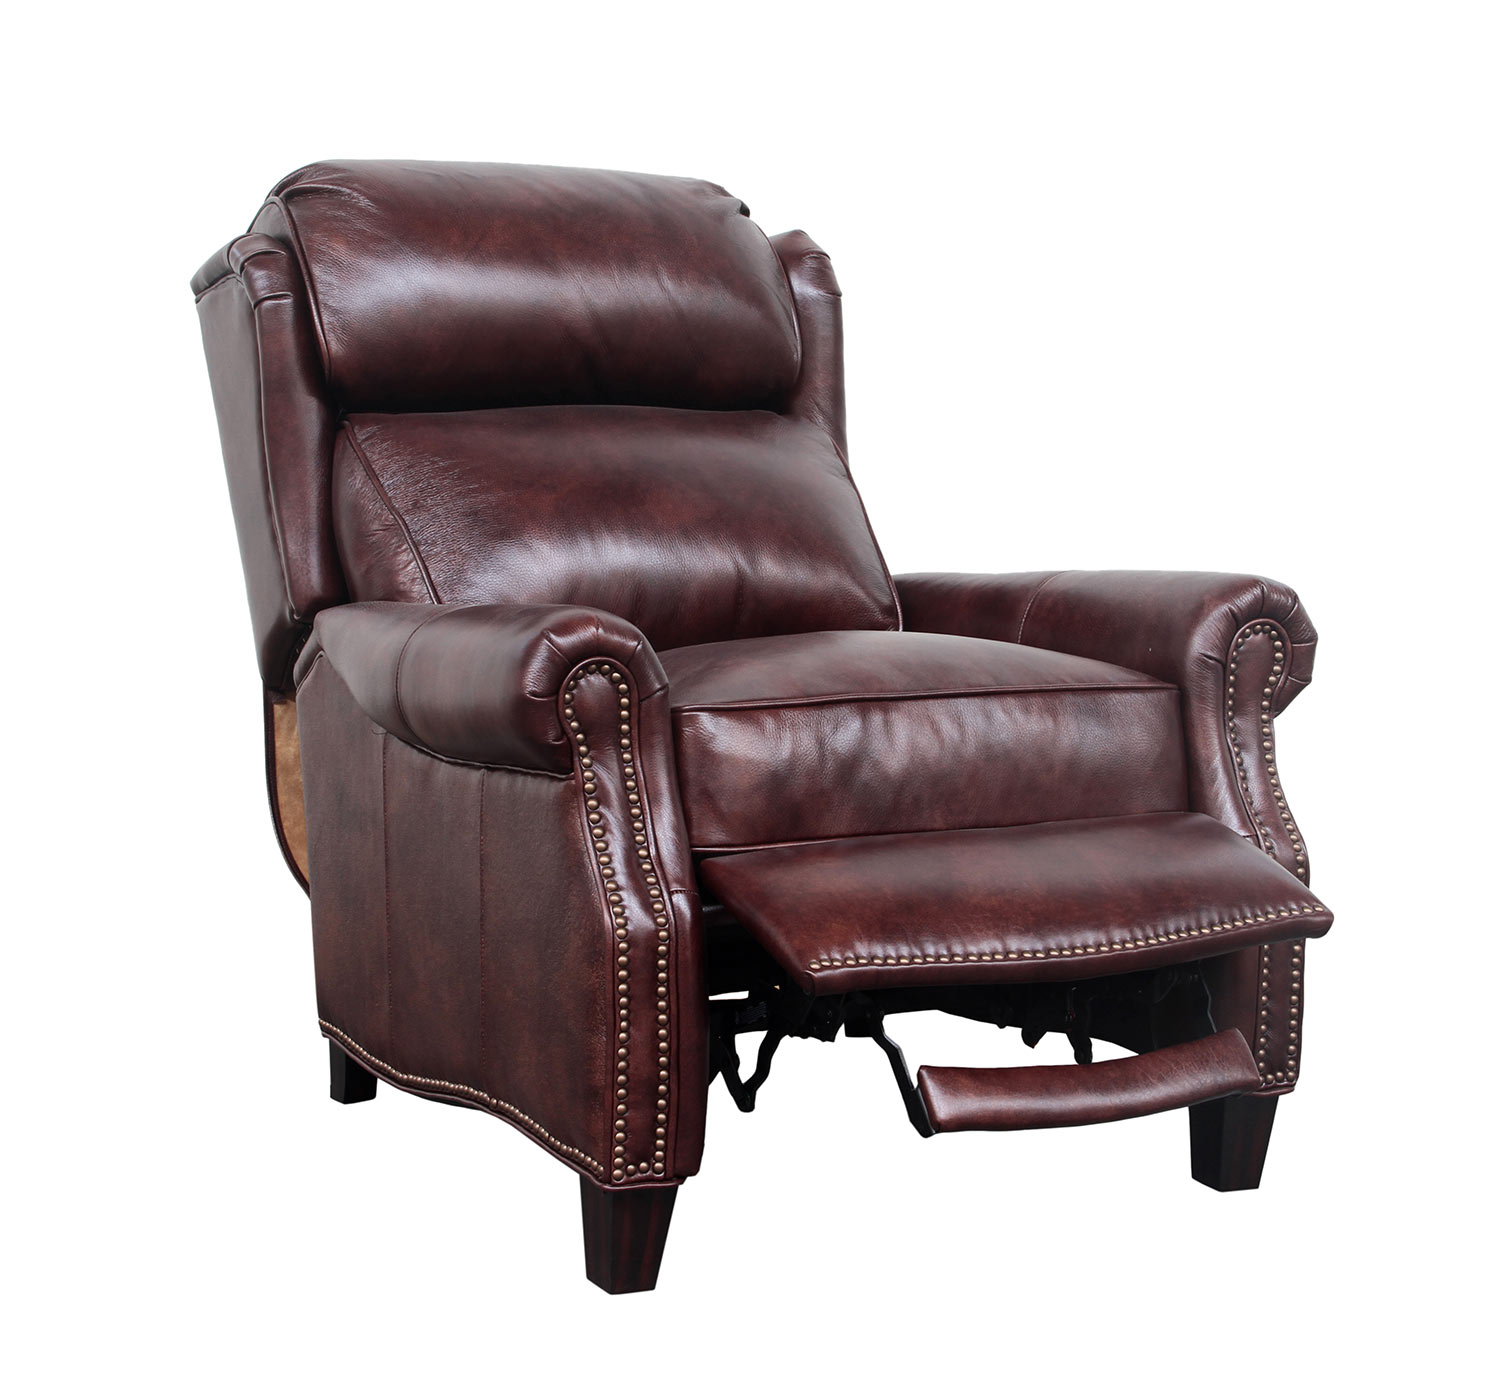 Barcalounger Meade Recliner Chair - Wenlock Fudge/all leather